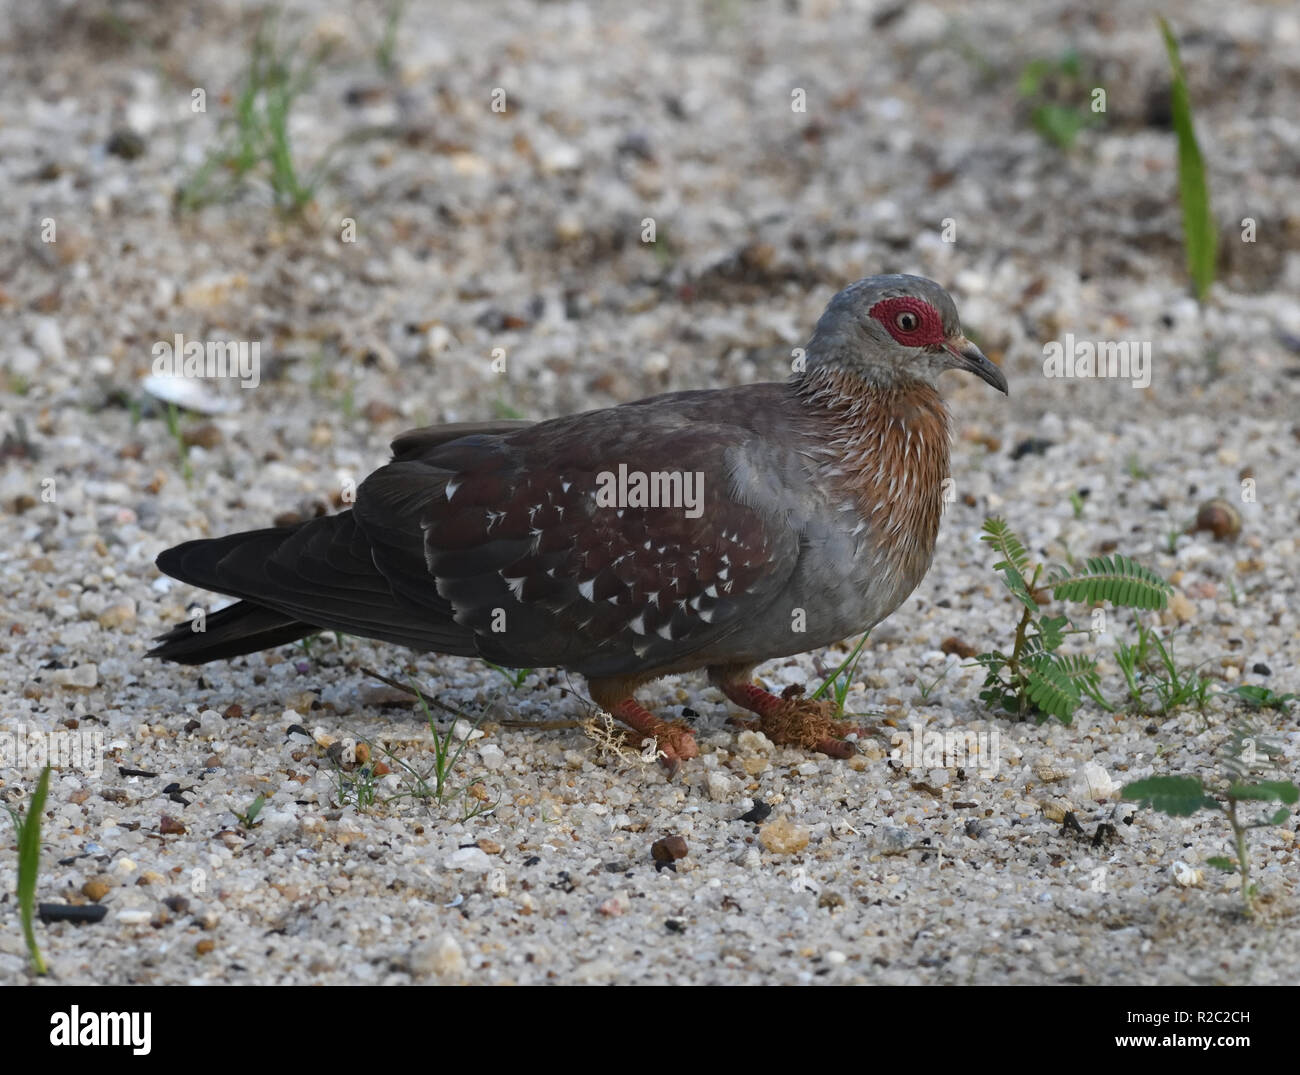 A speckled pigeon (Columba guinea) or African rock pigeon on the beach of Lake Victoria. Entebbe, Uganda. Stock Photo